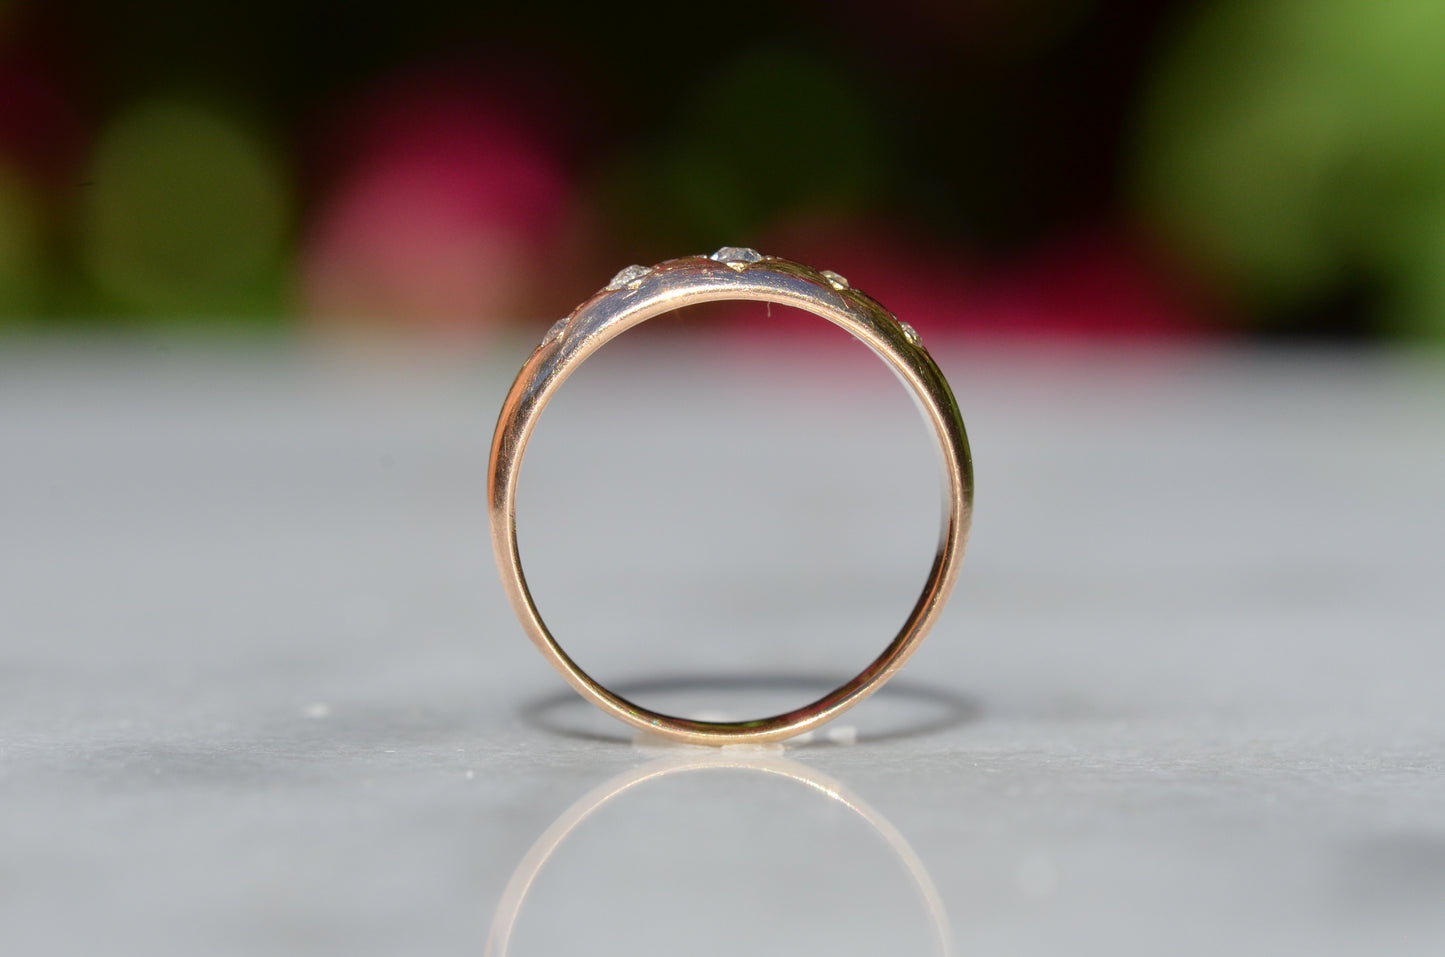 The ring is shown positioned upright and looking through the finger hole to highlight the low rise off the finger.